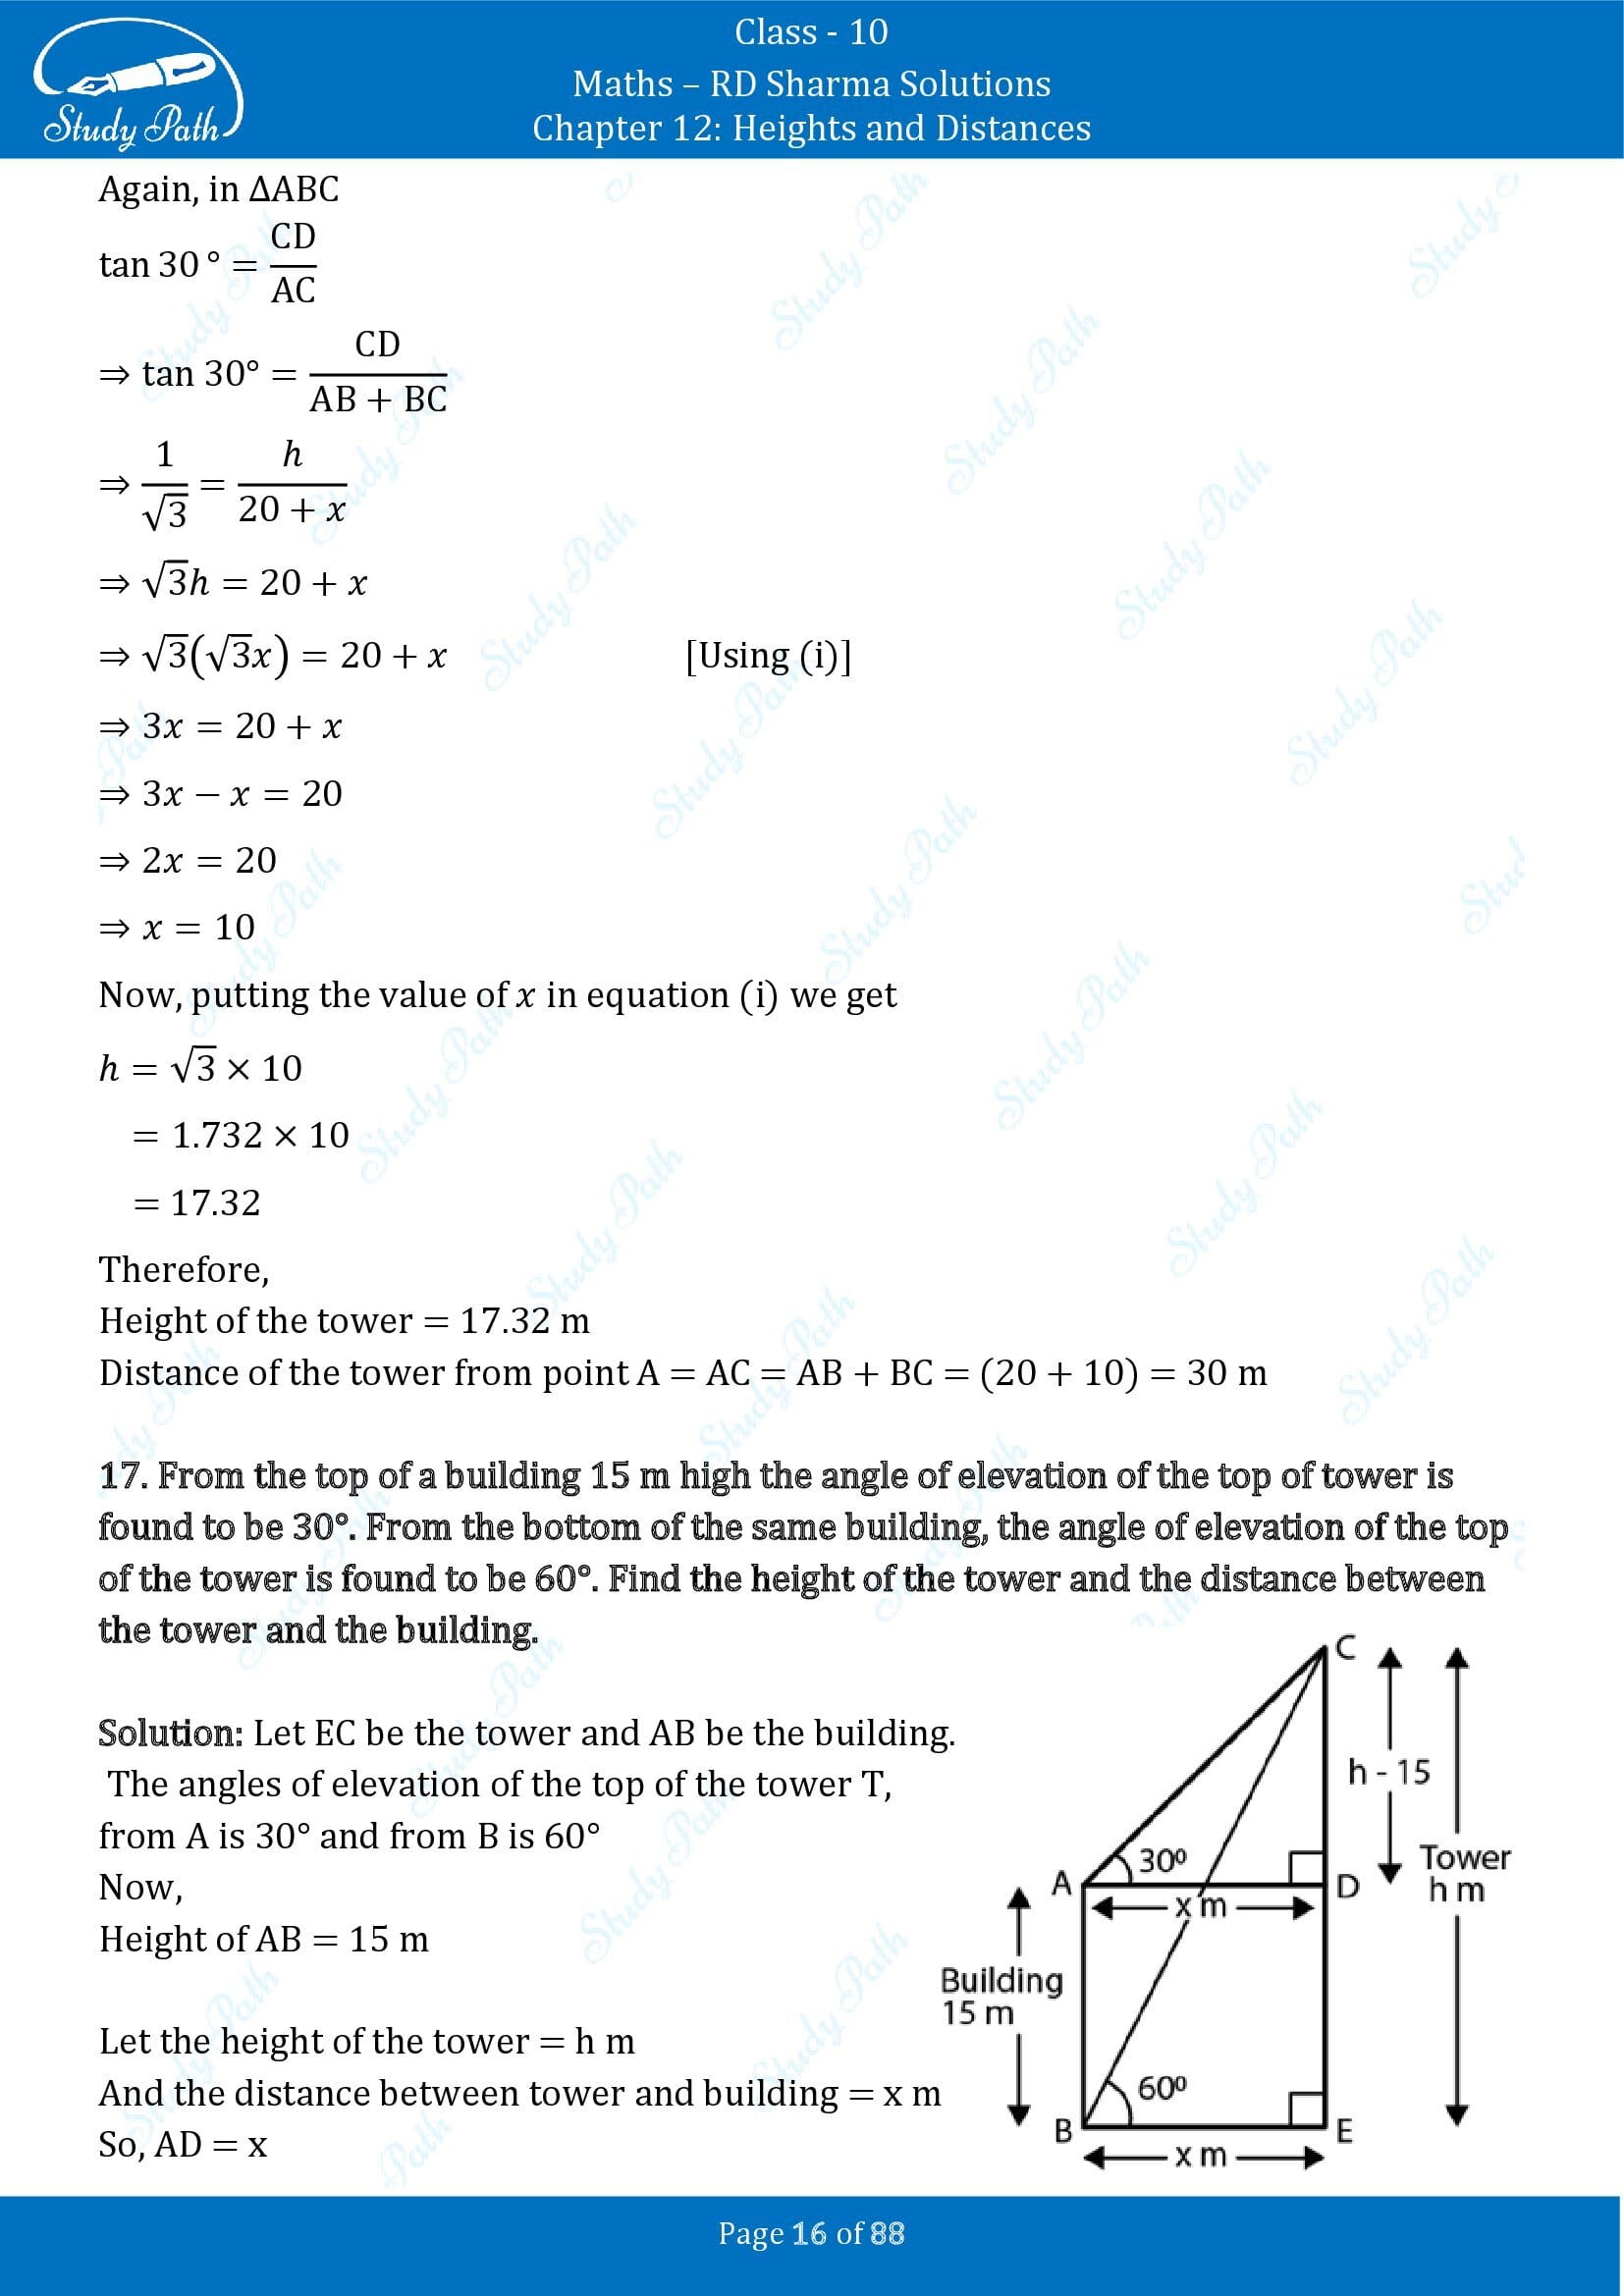 RD Sharma Solutions Class 10 Chapter 12 Heights and Distances Exercise 12.1 00016